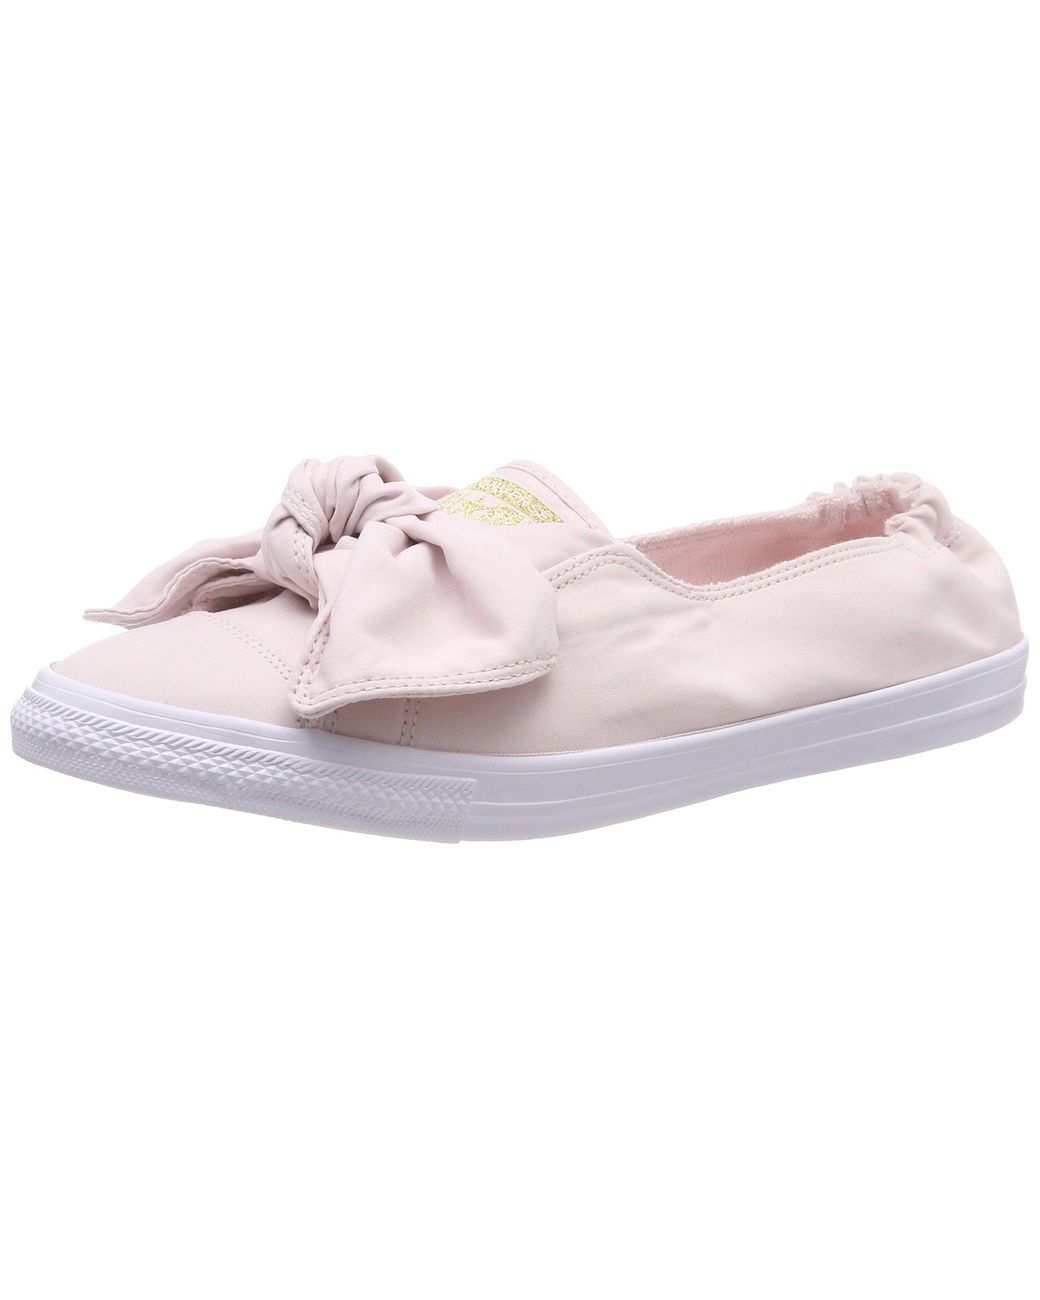 Converse Ctas Knot Barely Rose Slip On Trainers in Pink | Lyst UK